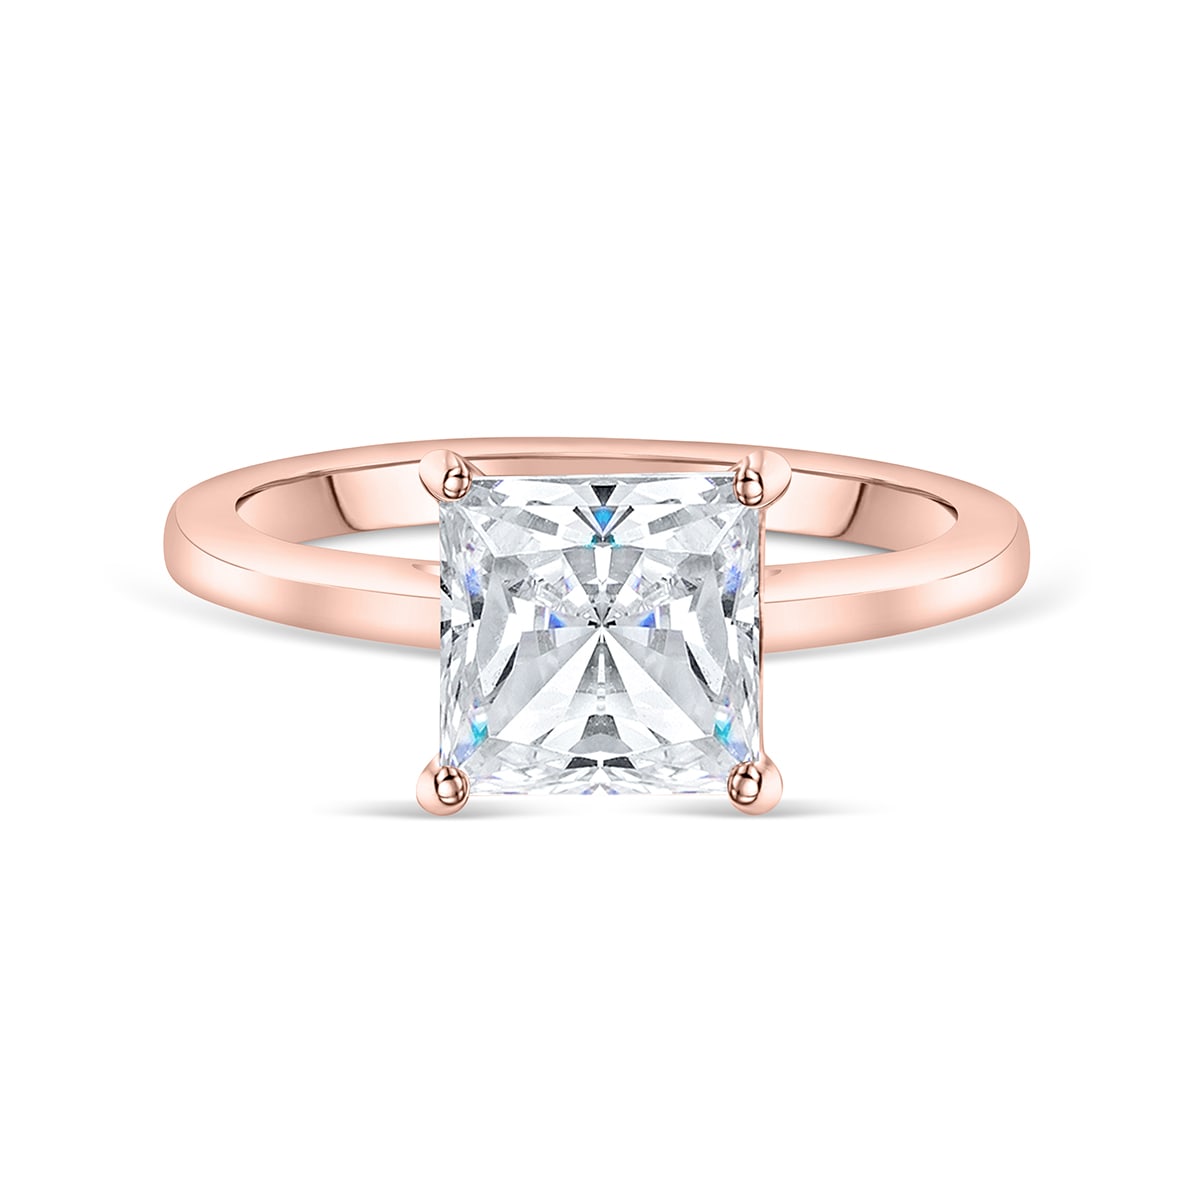 the olivia rose gold princess cut wedding ring solitaire